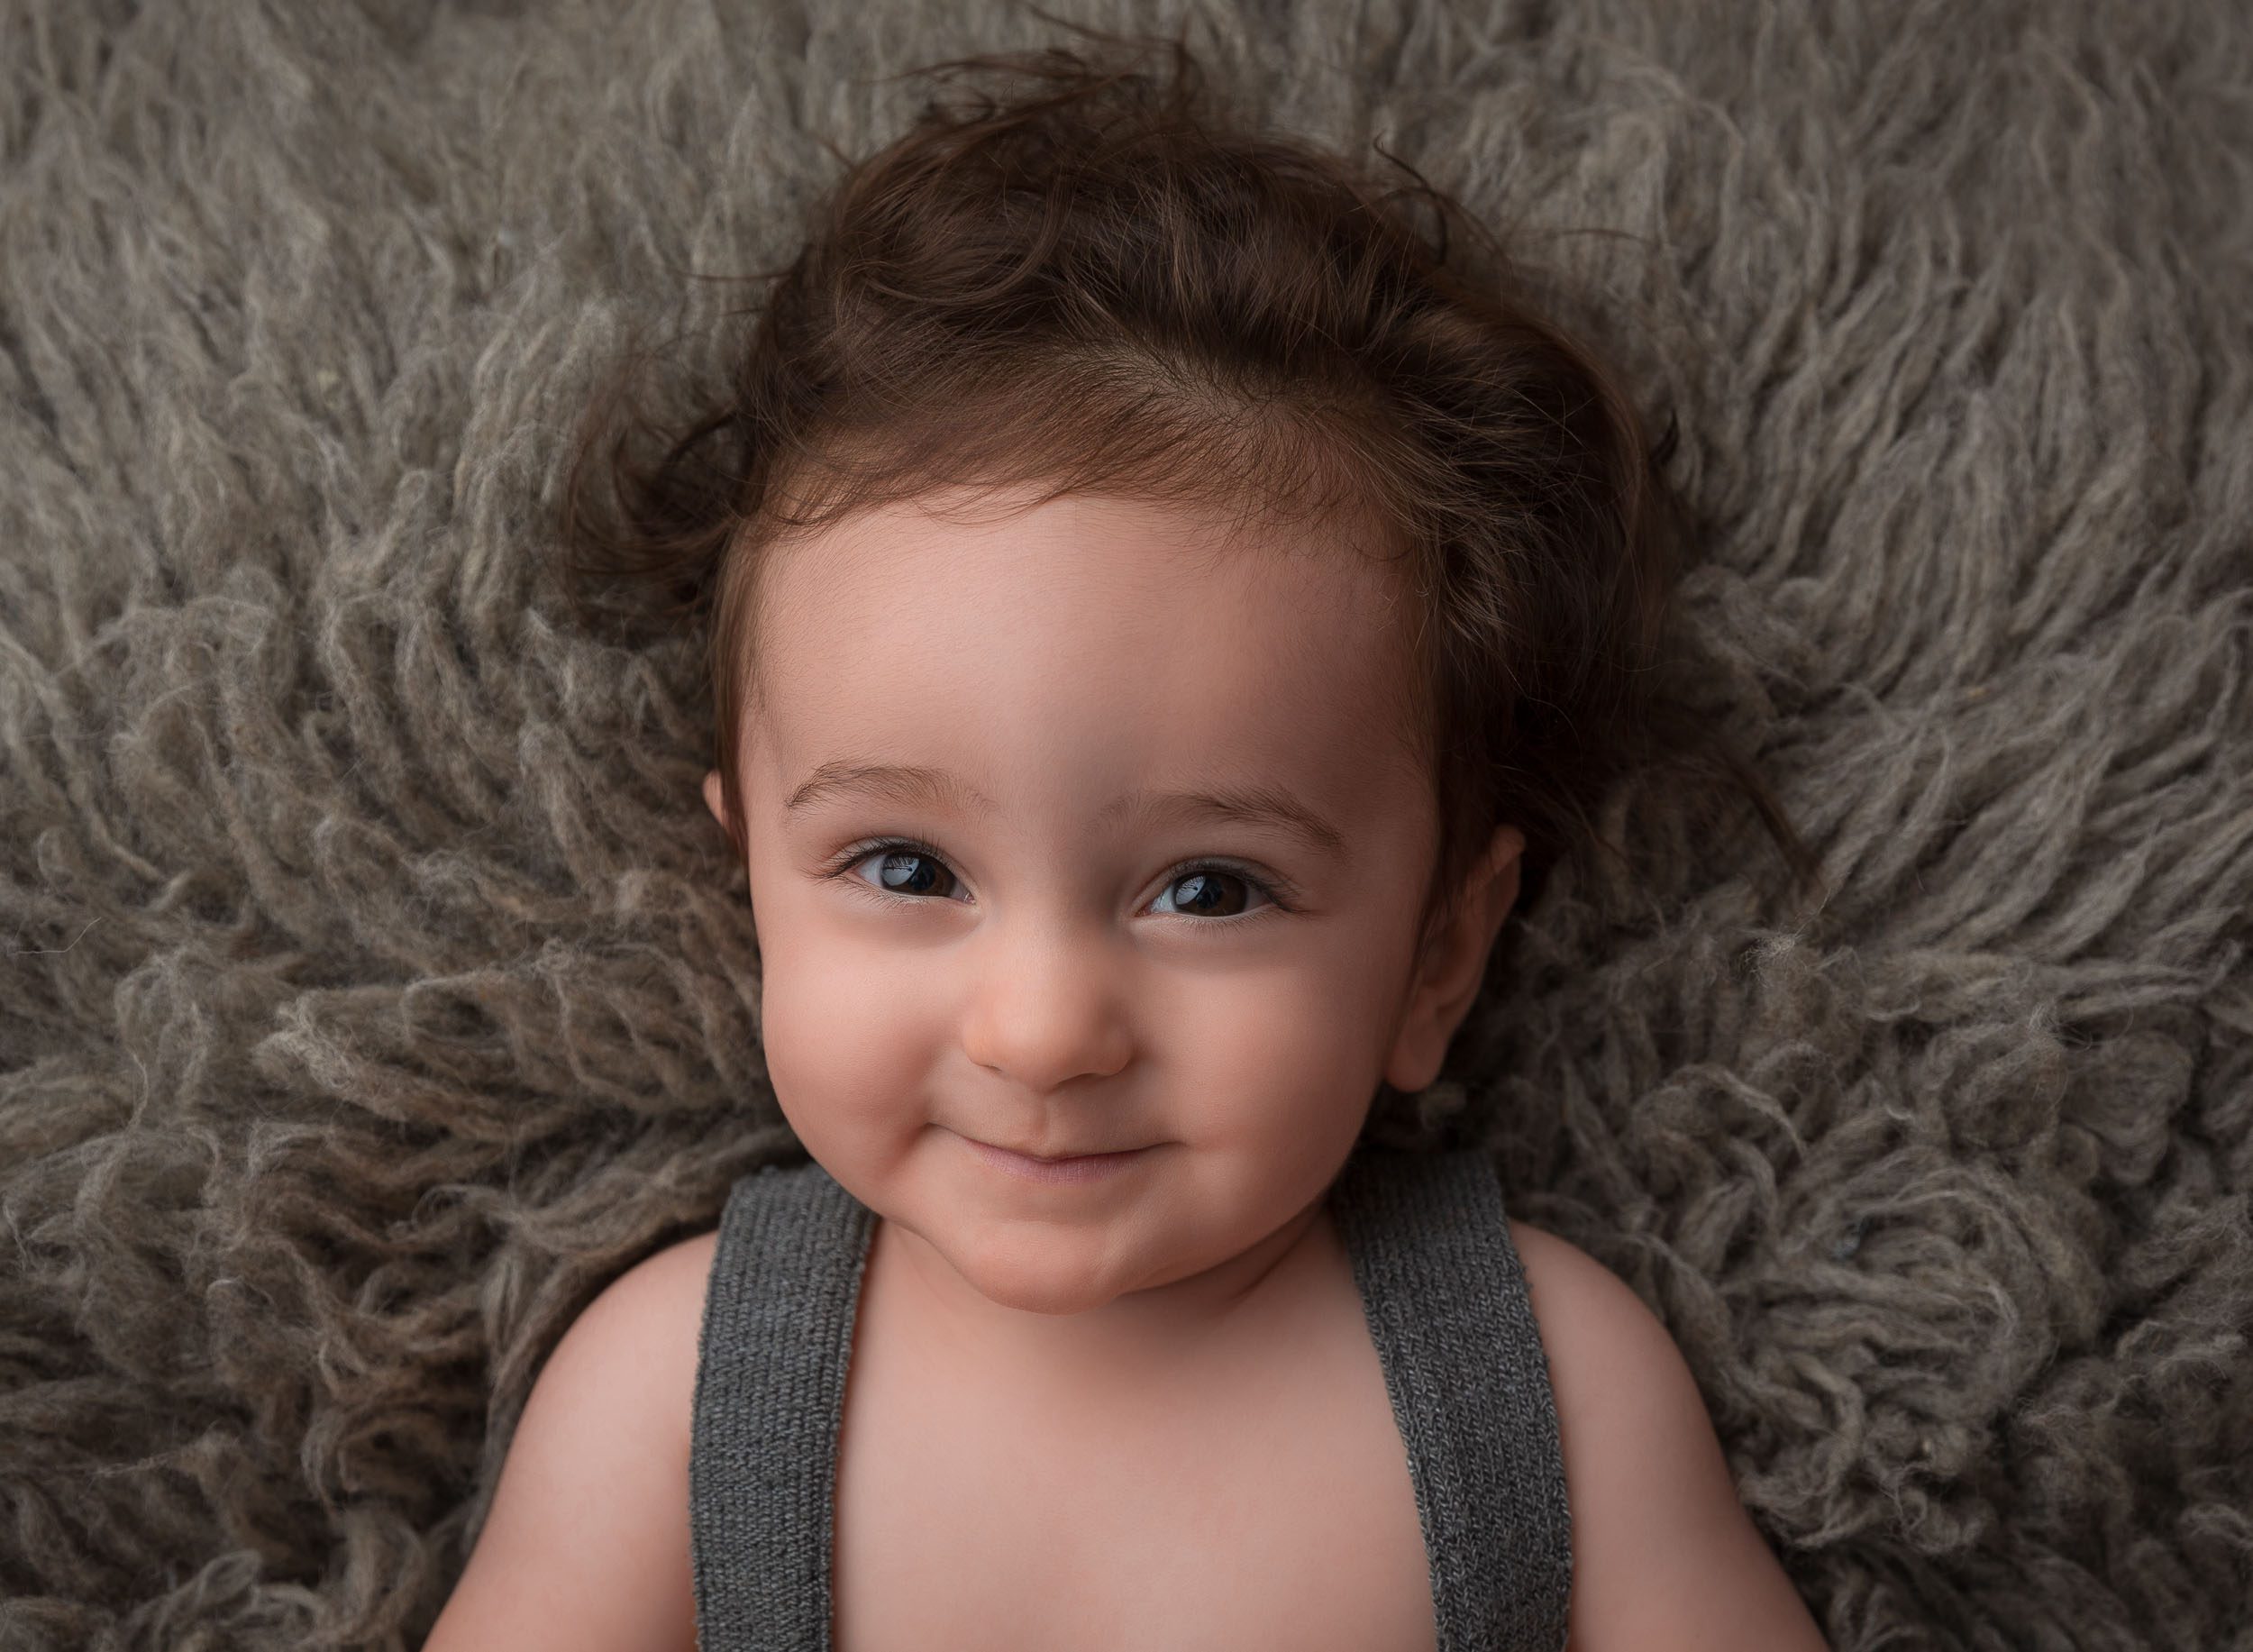 baby boy in overalls on grey rug looking up at camera